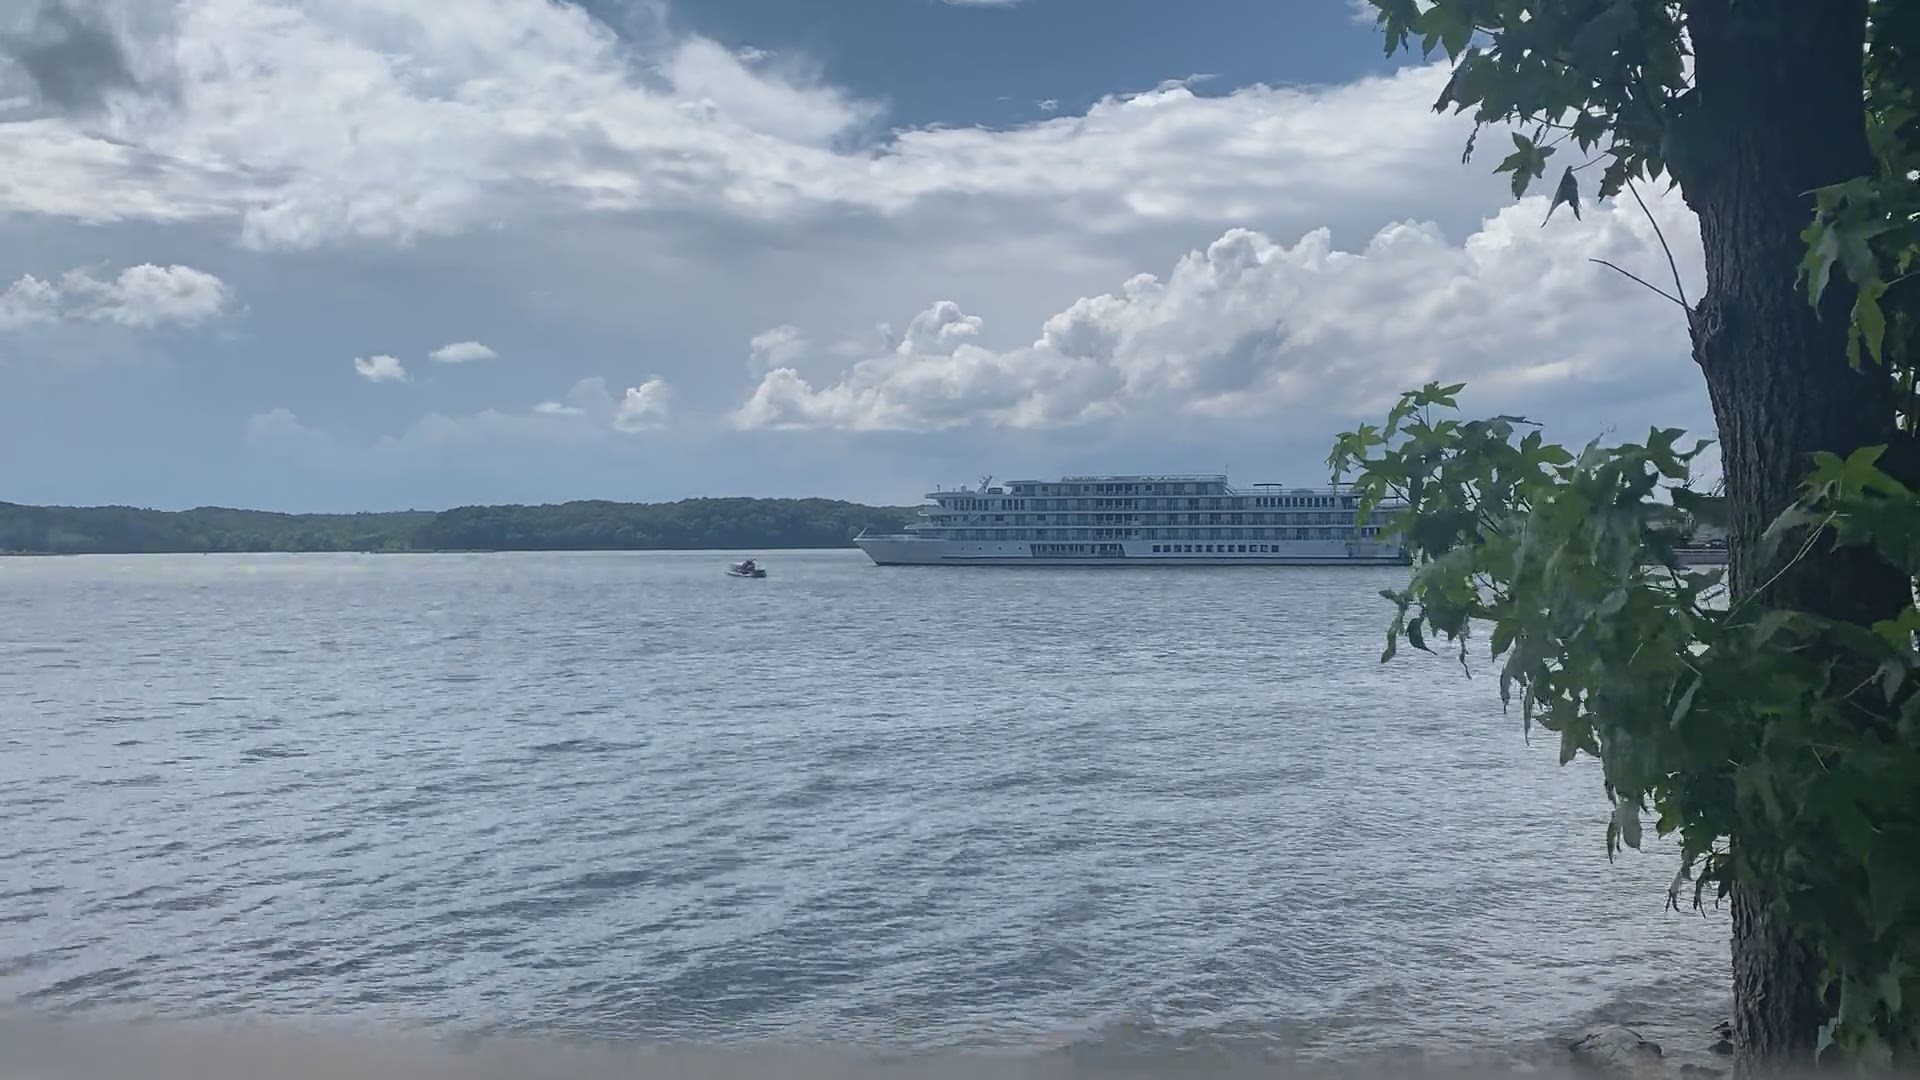 A riverboat stuck in Lake Barkley in Cadiz, Kentucky for more than a week was freed Friday, the U.S. Coast Guard said in a news release.